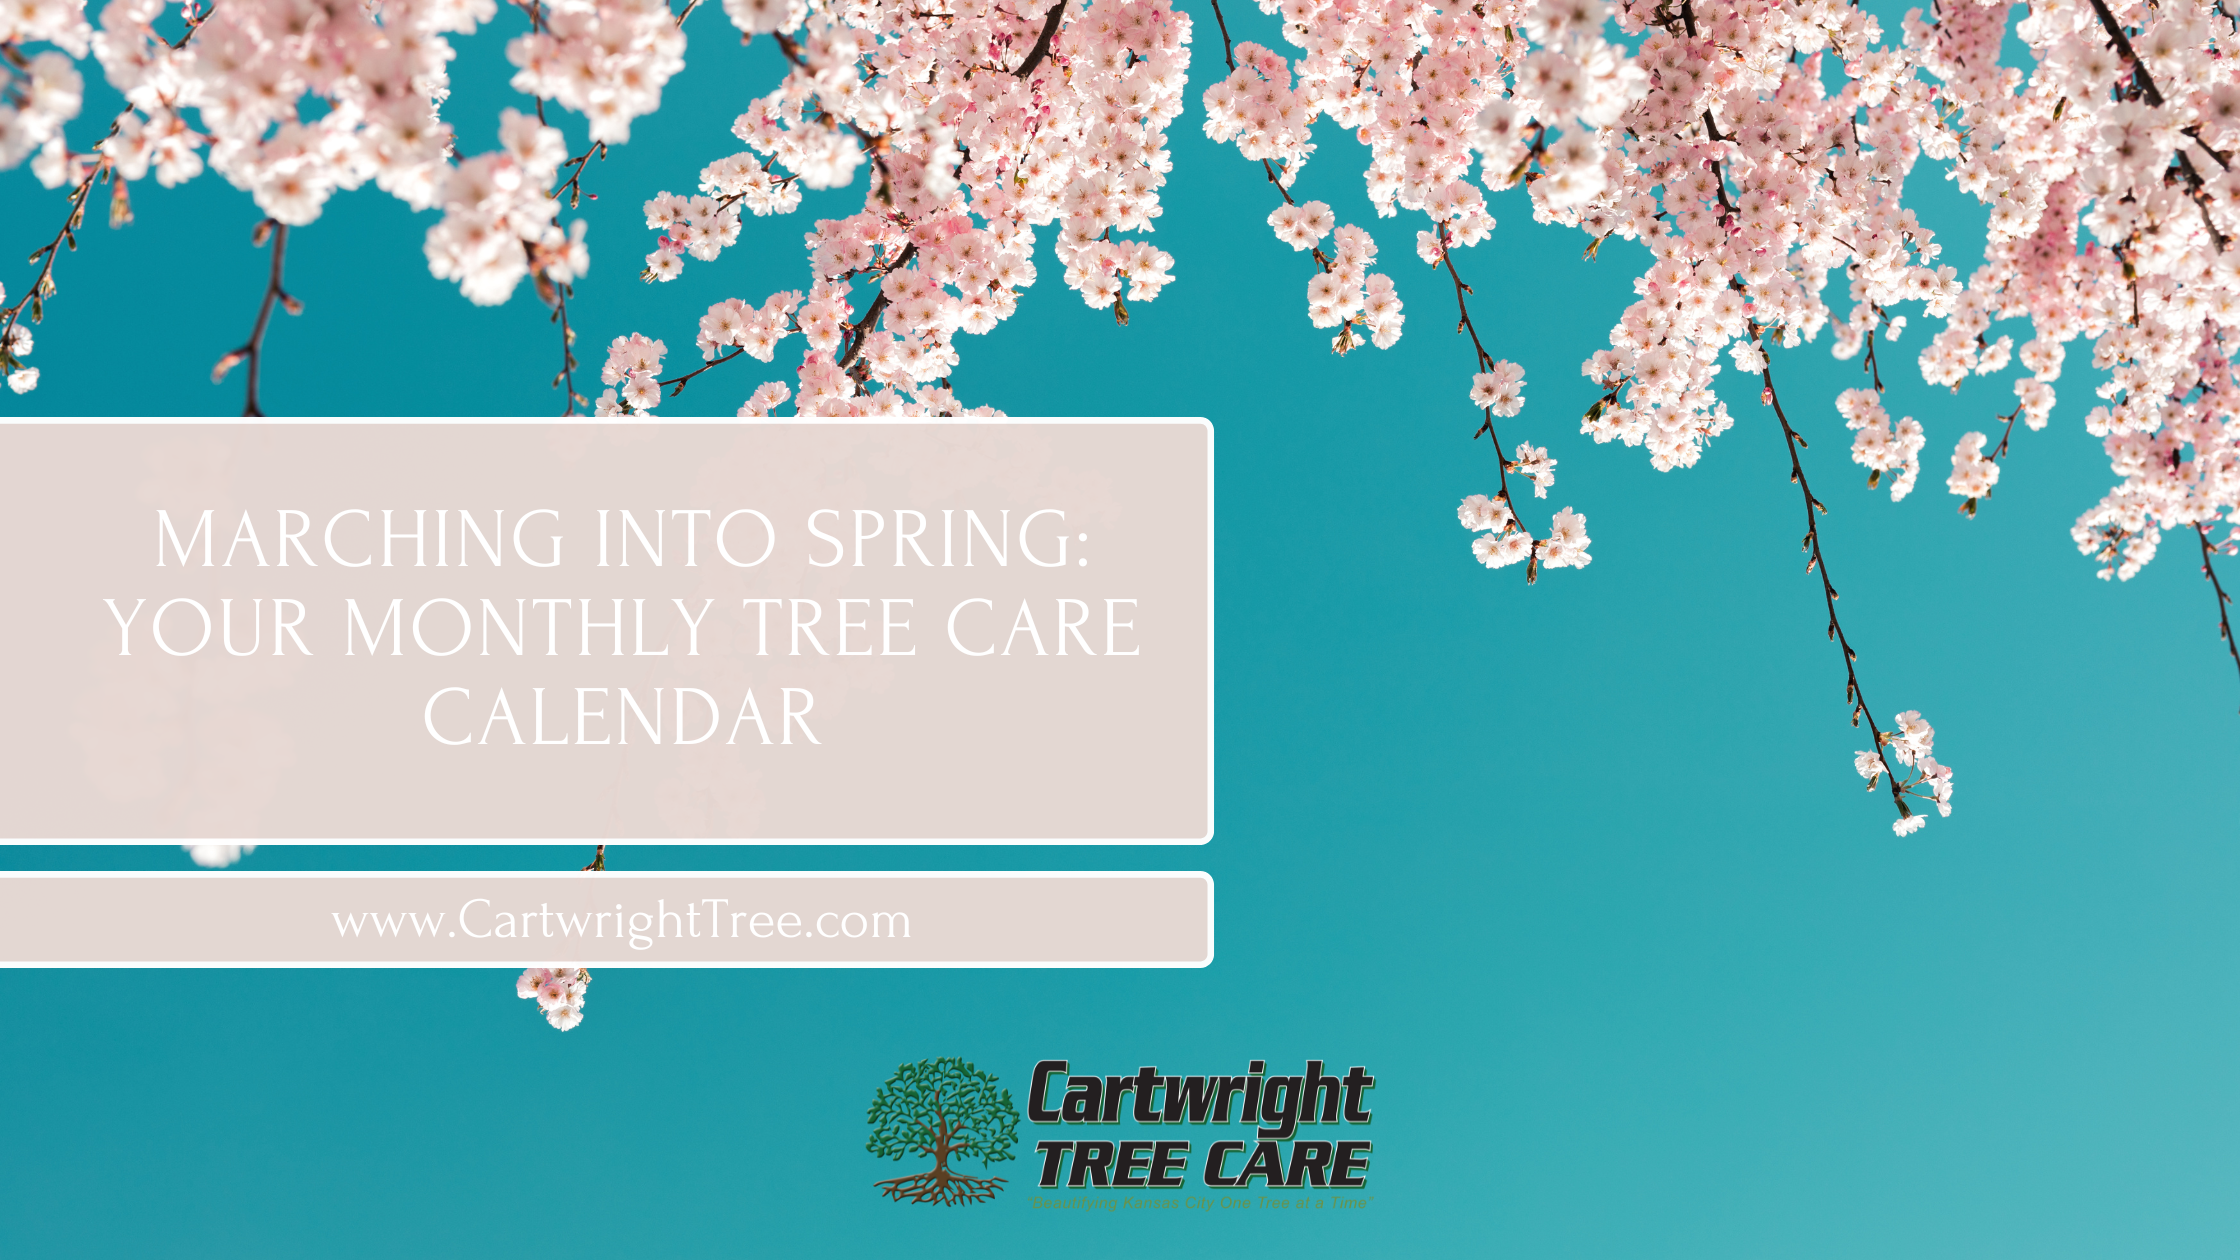 Blog Cover - Marching into Spring Your Monthly Tree Care Calendar